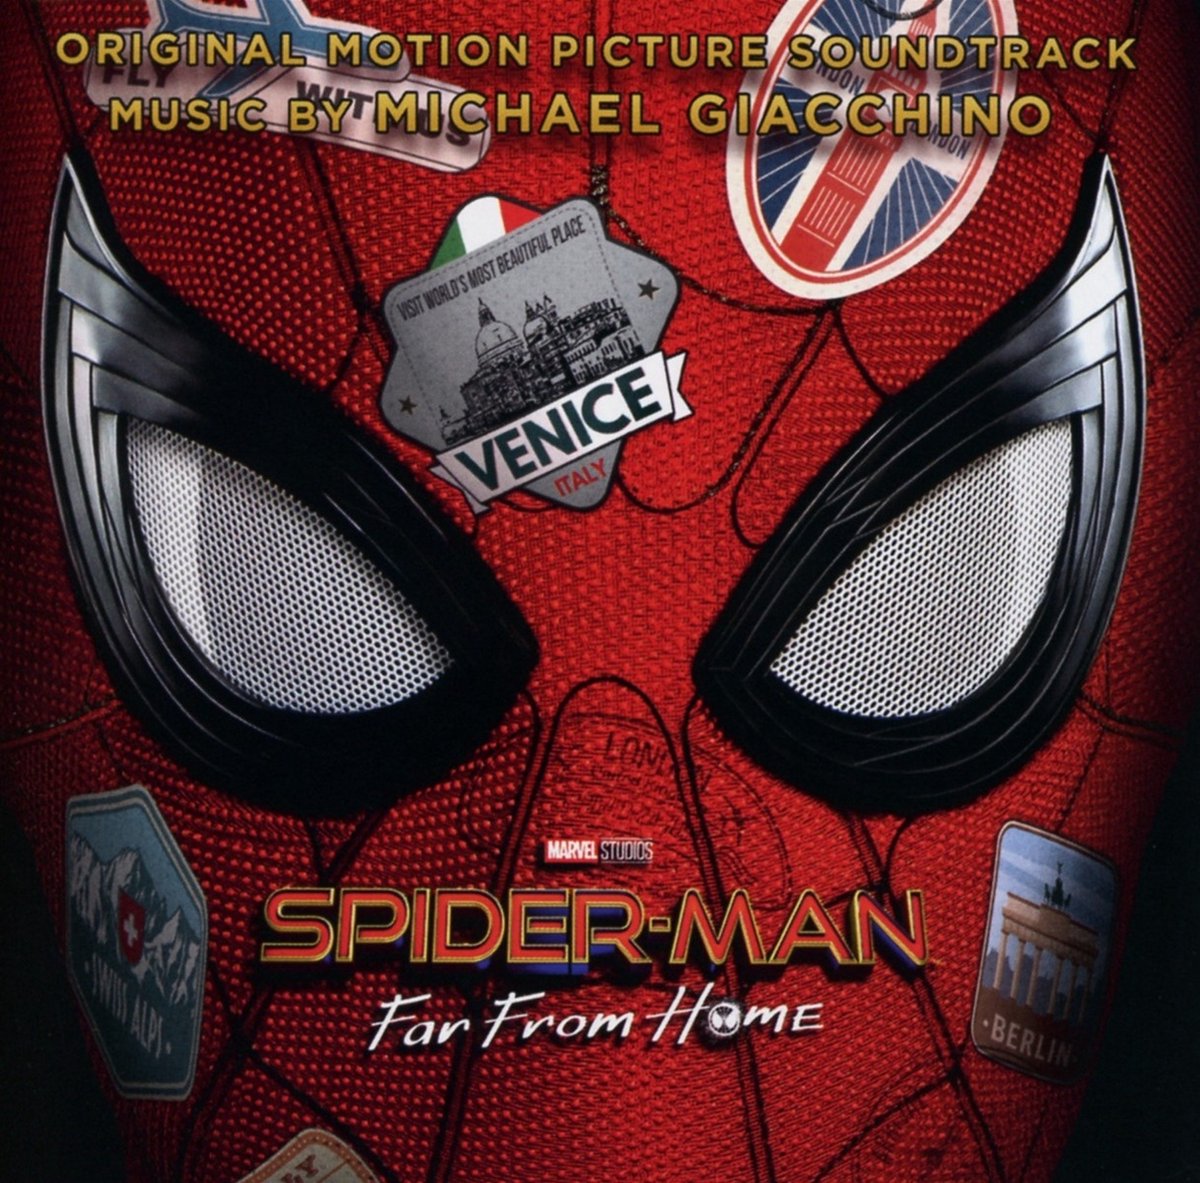 Spider-Man: Far From Home (Original Motion Picture Soundtrack) | Michael Giacchino